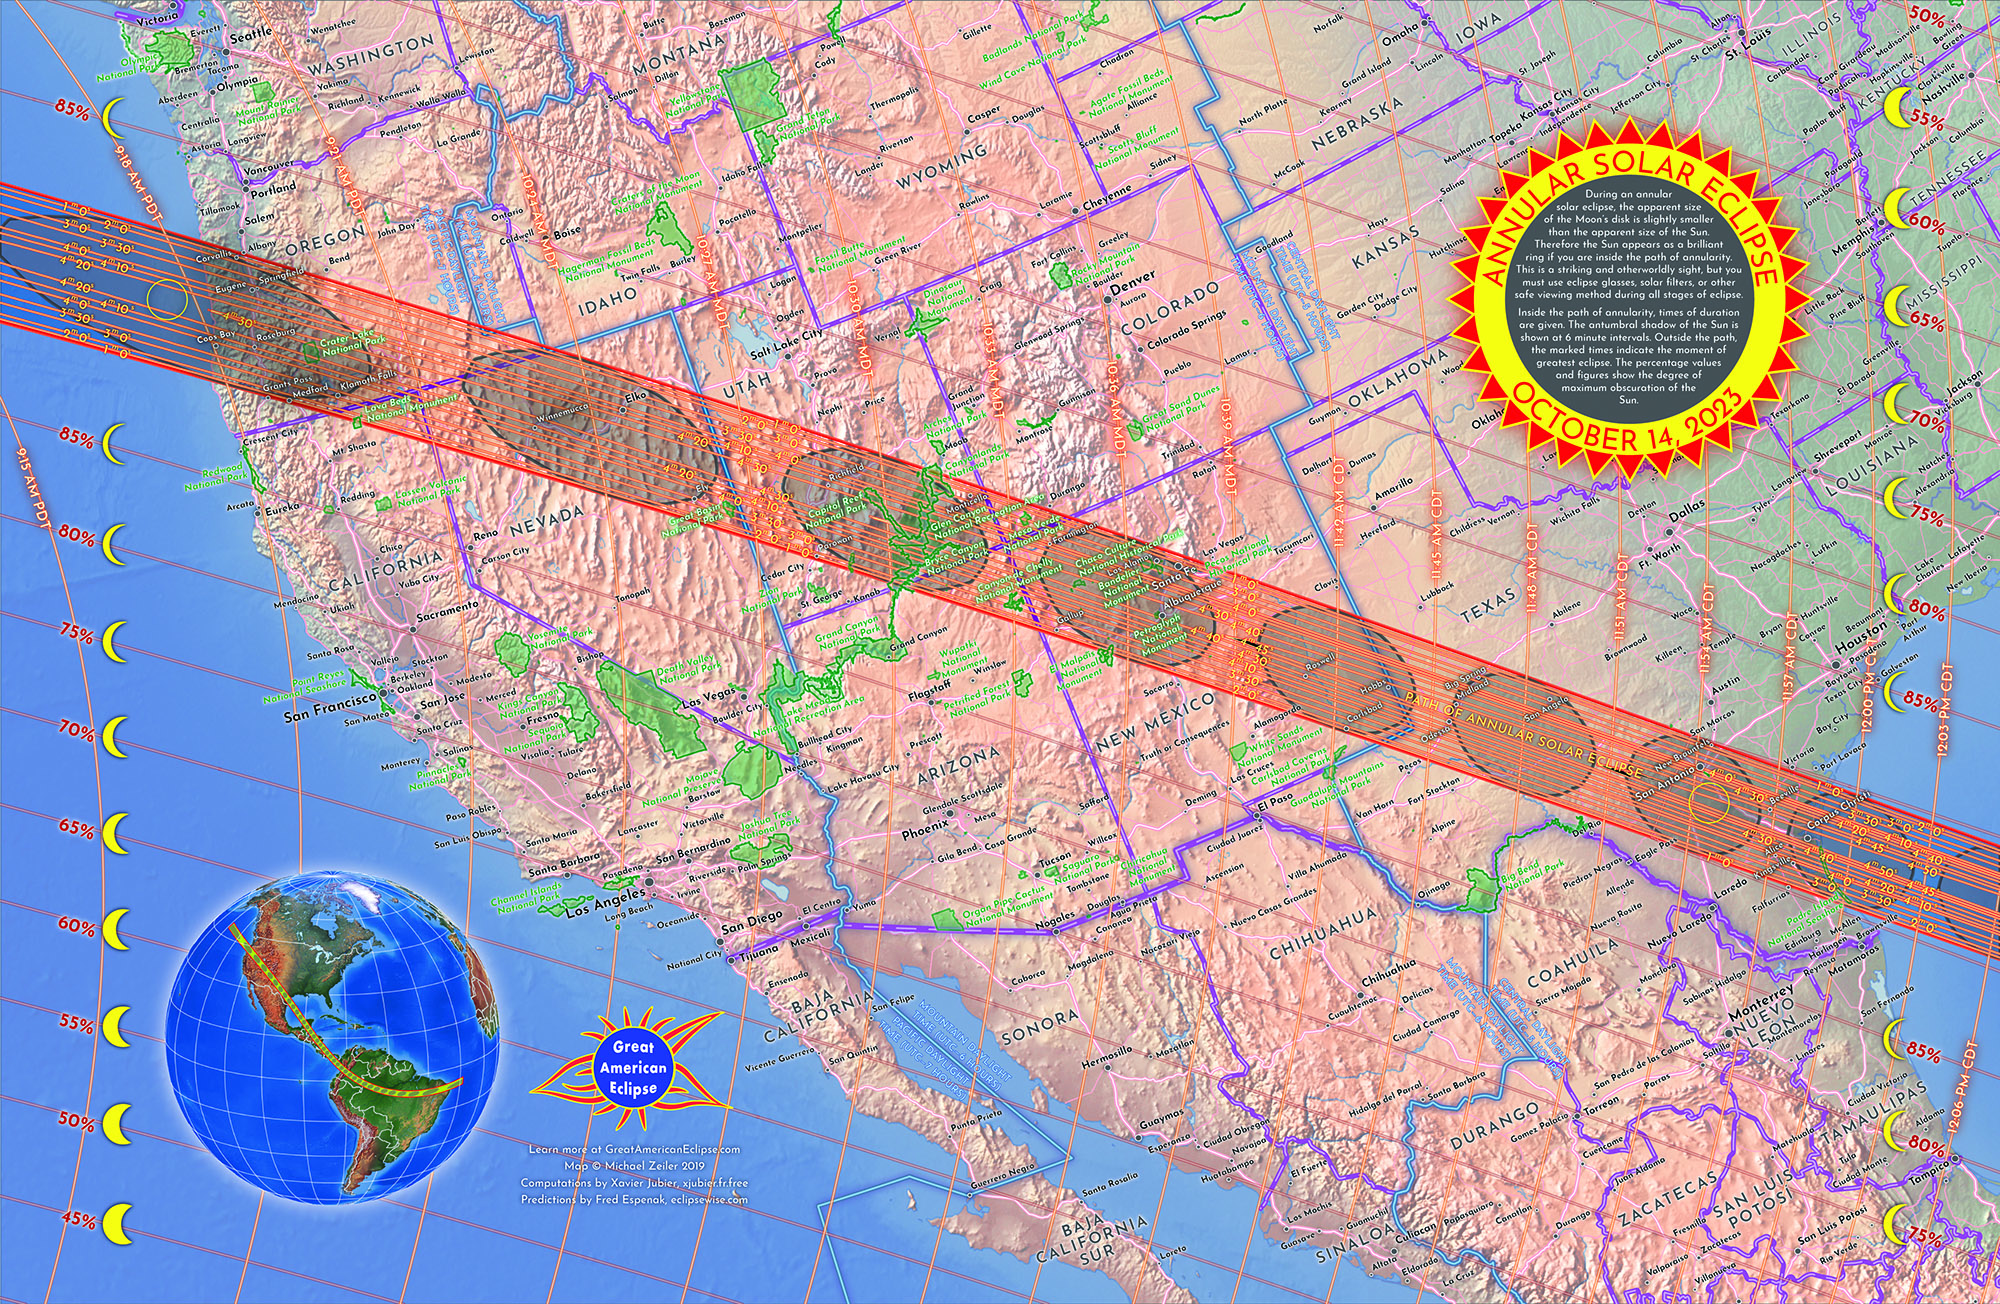 CREDIT: GreatAmericanEclipse.com - THE PATH OF ANNULARITY ACROSS THE UNITED STATES